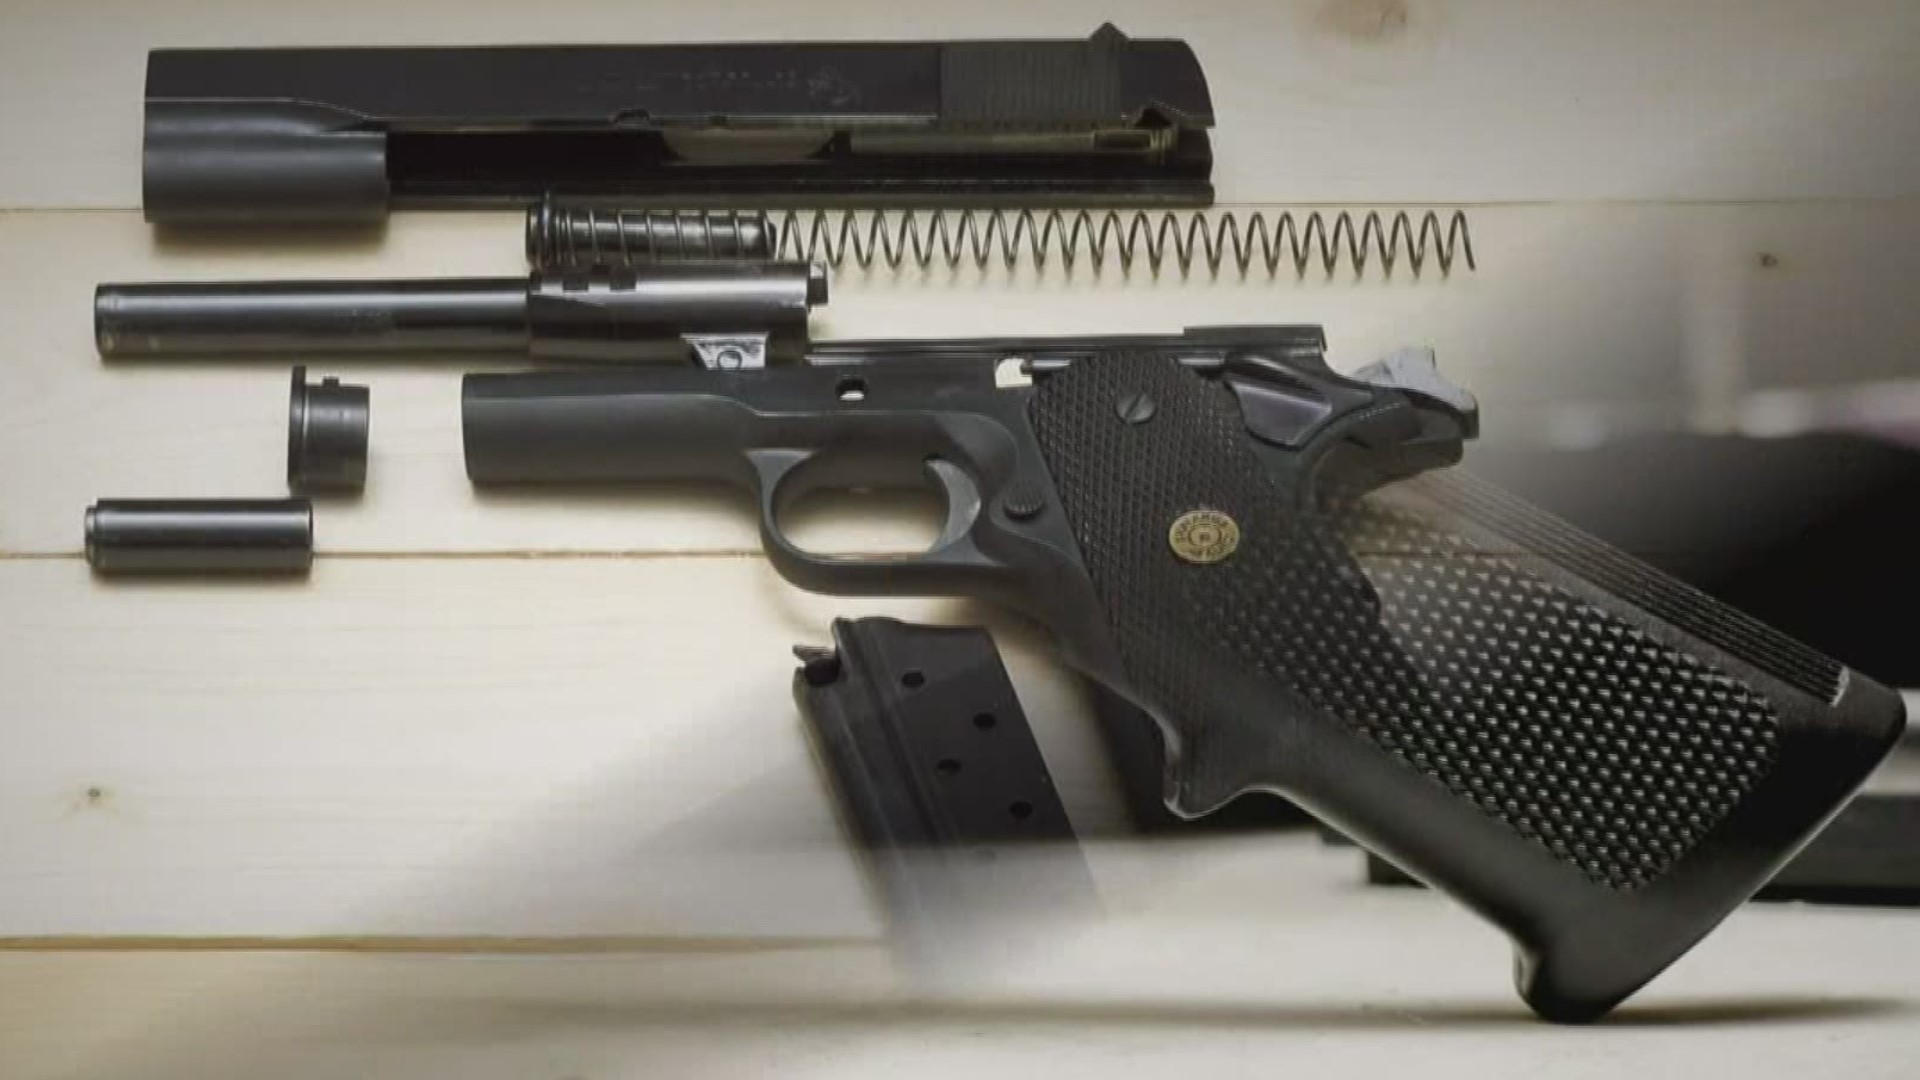 These types of weapons can be problem for law enforcement, at times getting in the way of solving cases and creating another way for some to get around the law.